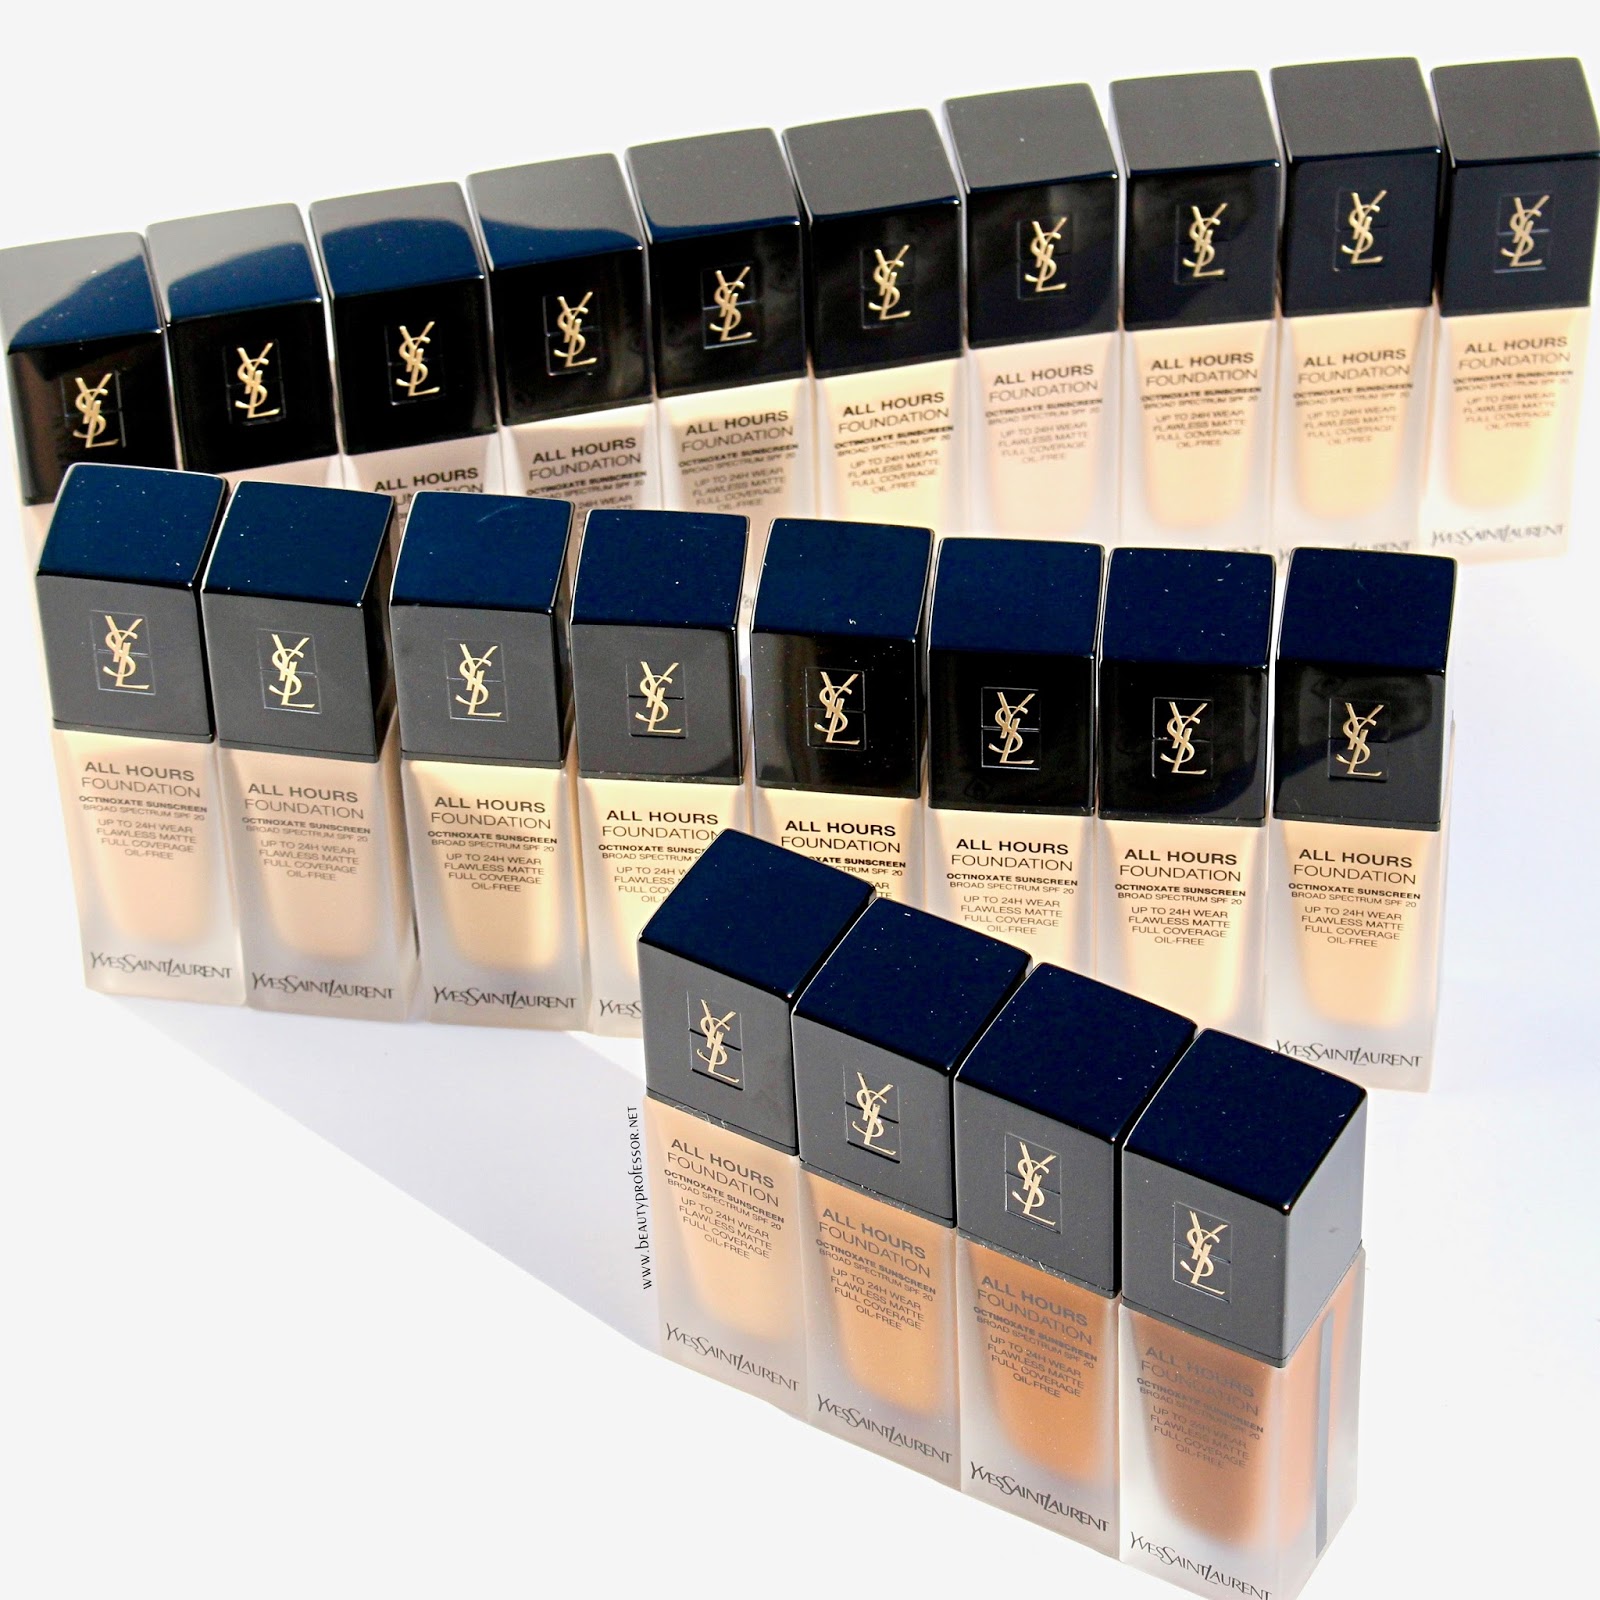 YSL’s All Hours Longwear Natural Matte Foundation